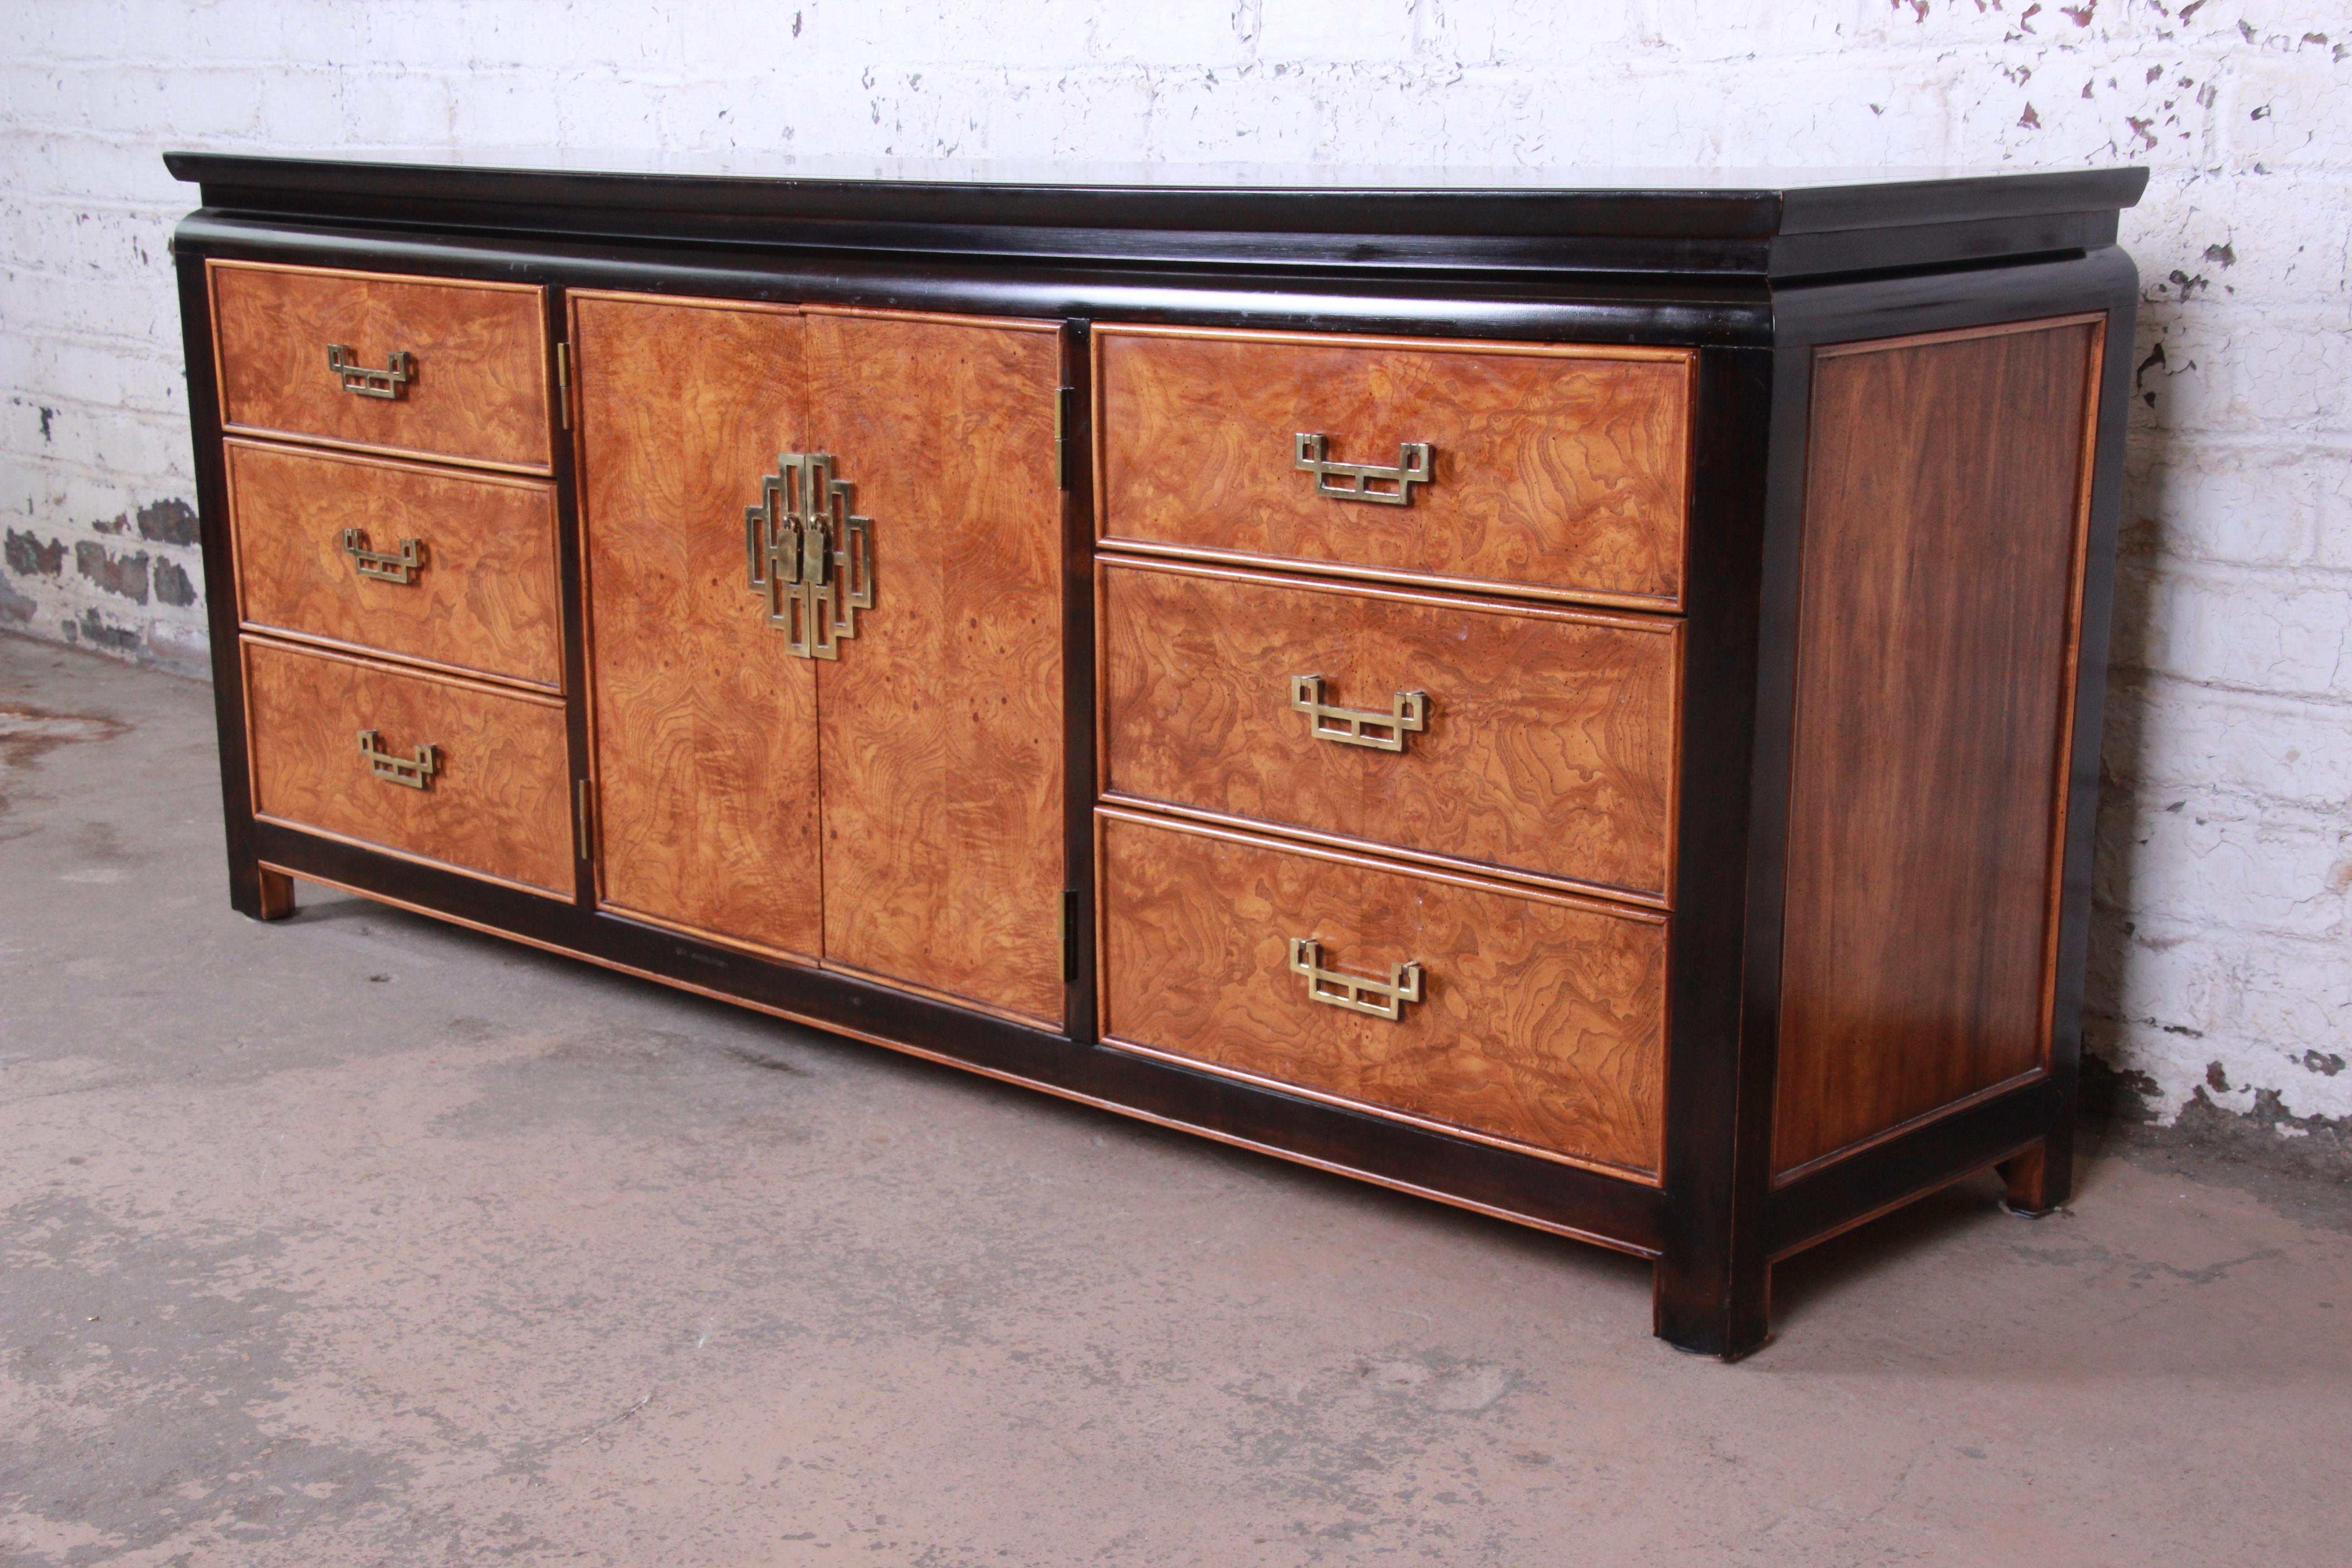 Offering an exceptional Century Furniture black lacquered and burl wood chinoiserie long dresser or credenza. The piece is from the popular Chin Hua line and features a beautiful burl wood encased in black lacquer. It features three large drawers on